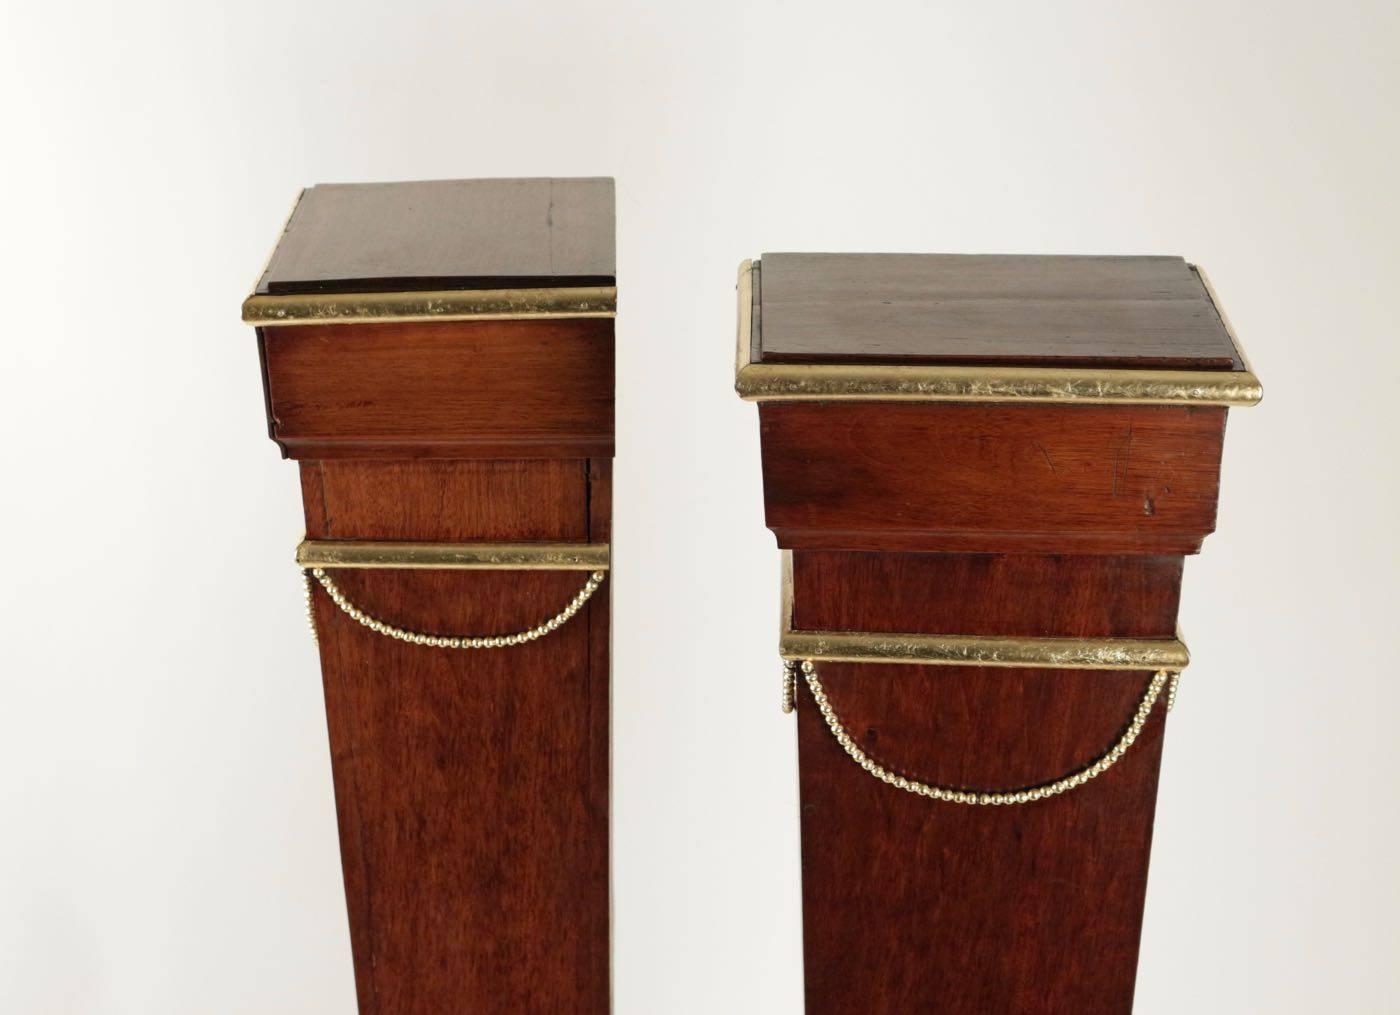 Pair of Sheaths, Consoles, Mahogany, Golden at the Gold Leaf, 19th Century For Sale 4